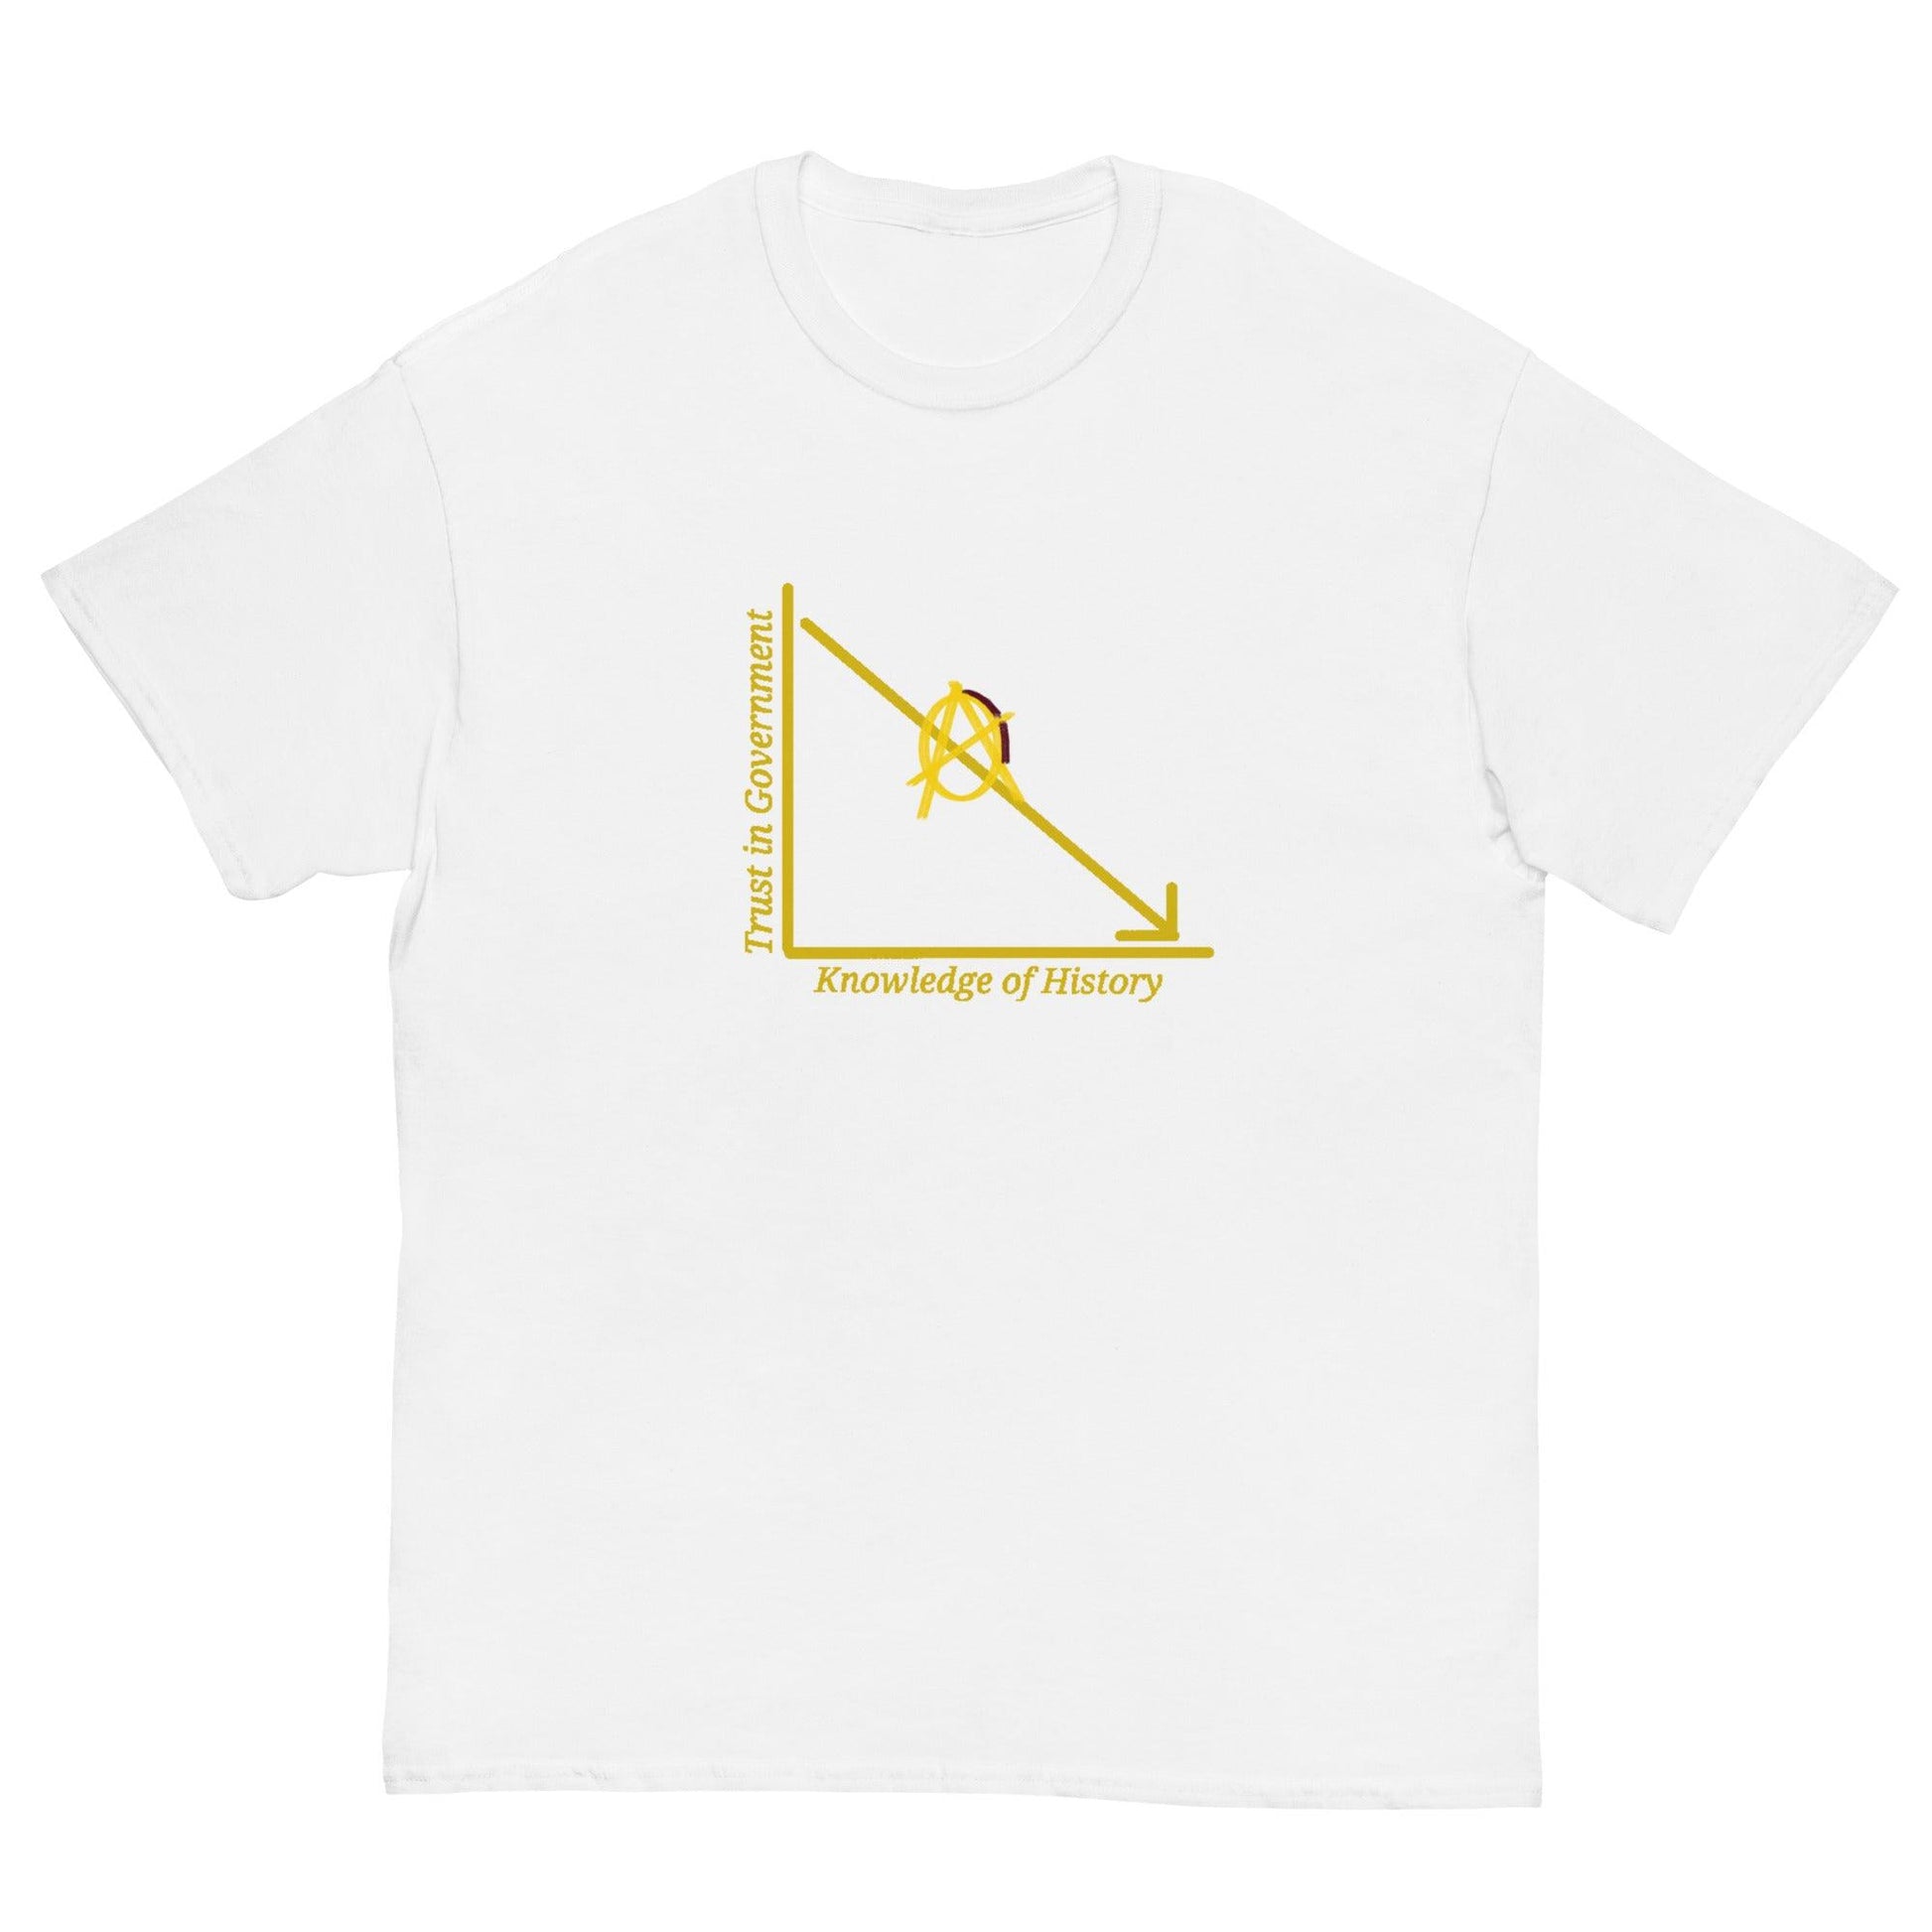 Anarchy "Trust in Government" Gold Classic tee - AnarchyWear